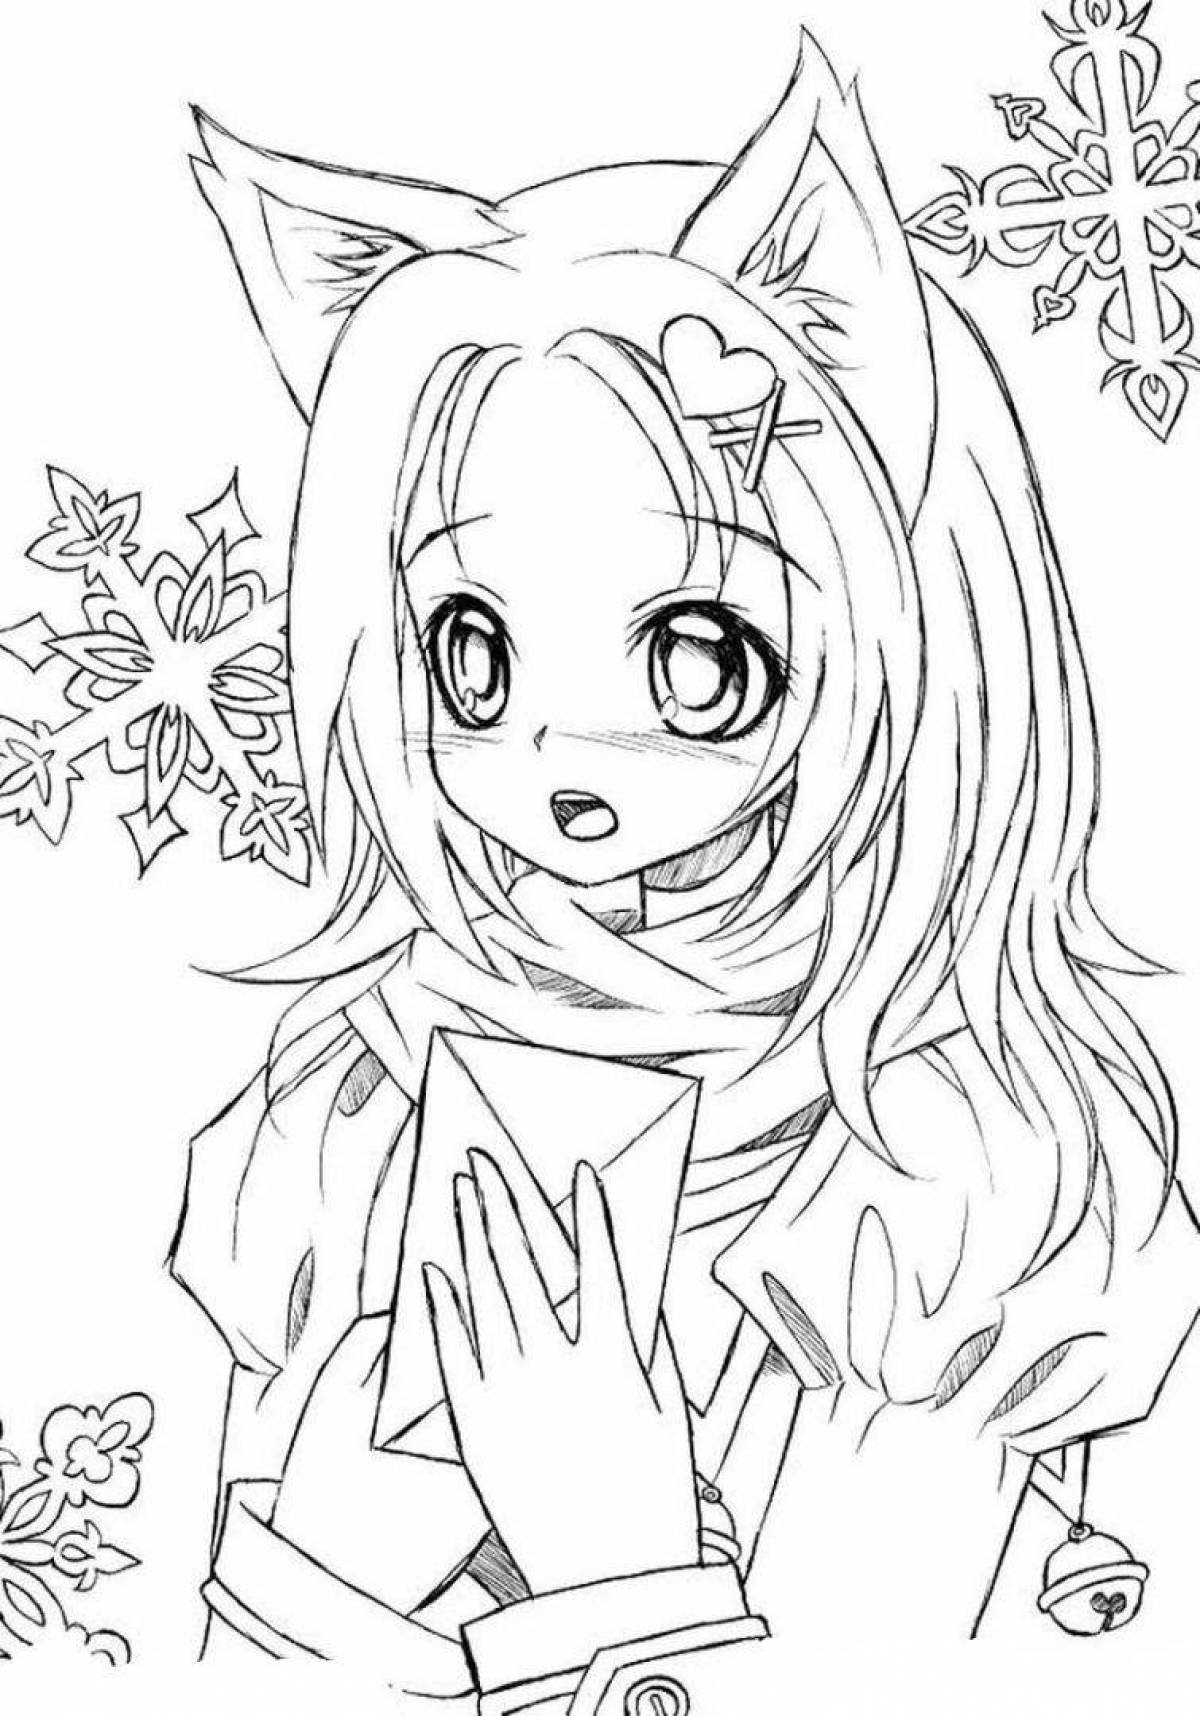 Exquisite anime world coloring book